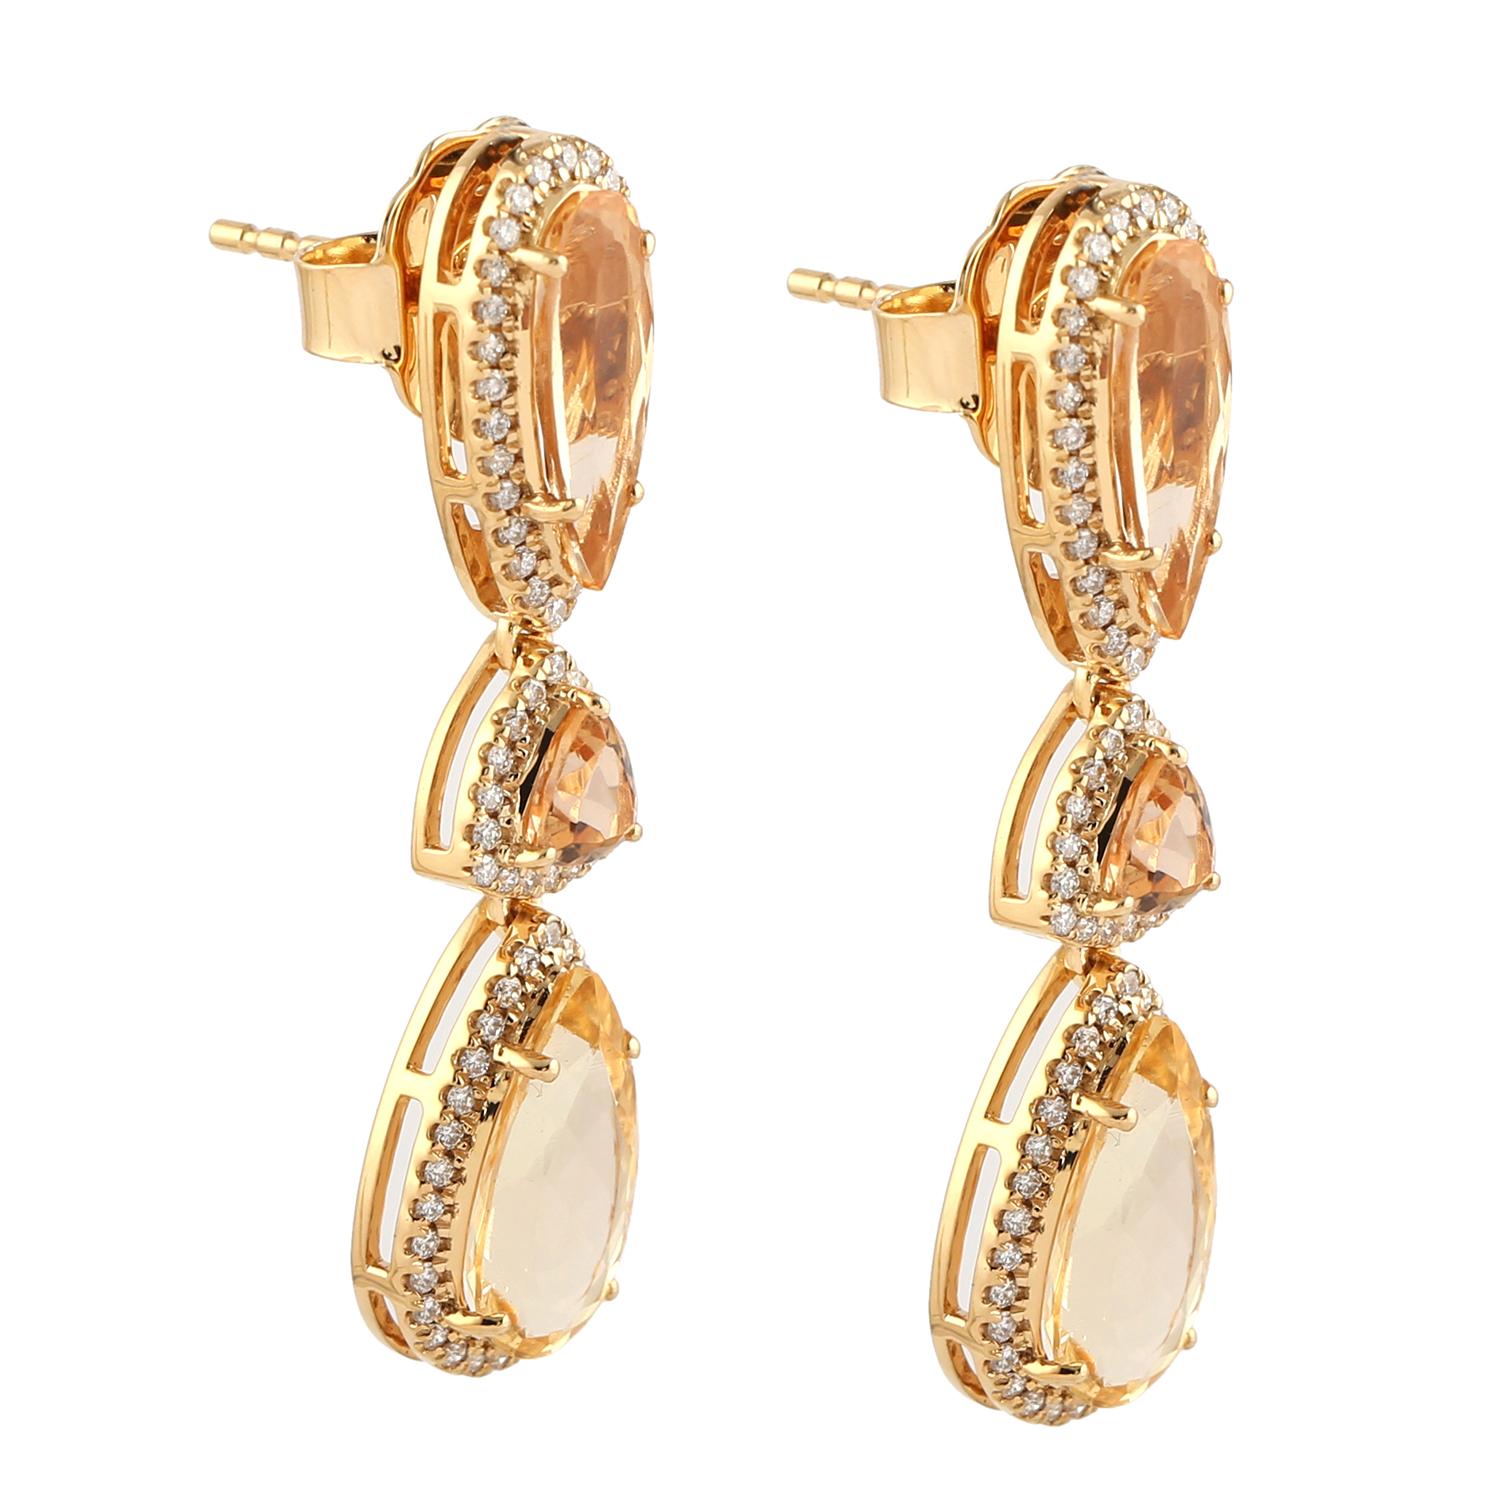 Cast in 14 karat gold, these exquisite earrings are hand set with 6.69 carats imperial topaz and .53 carats of glimmering diamonds. 

FOLLOW MEGHNA JEWELS storefront to view the latest collection & exclusive pieces. Meghna Jewels is proudly rated as